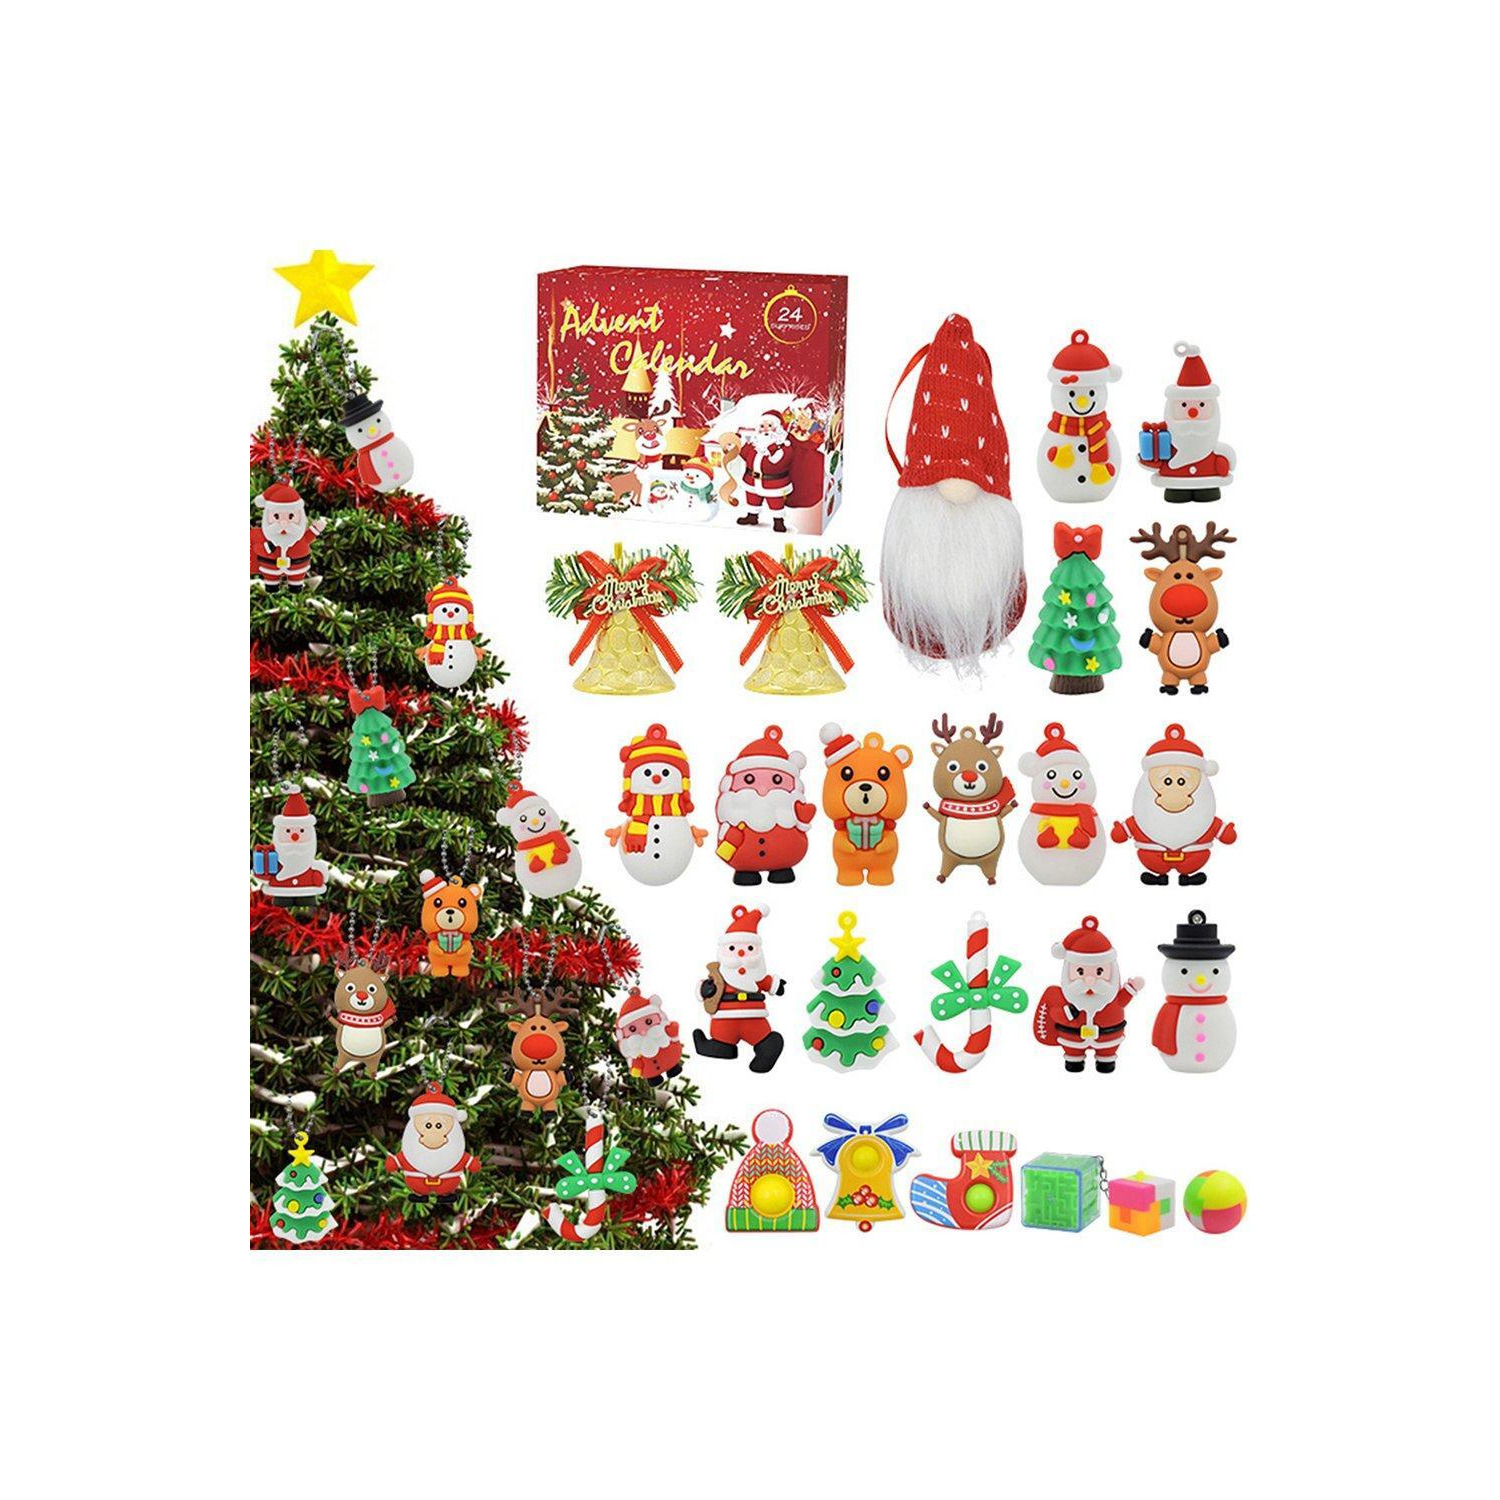 24 Pcs Christmas Party Blind Box Toy Gifts - image 1